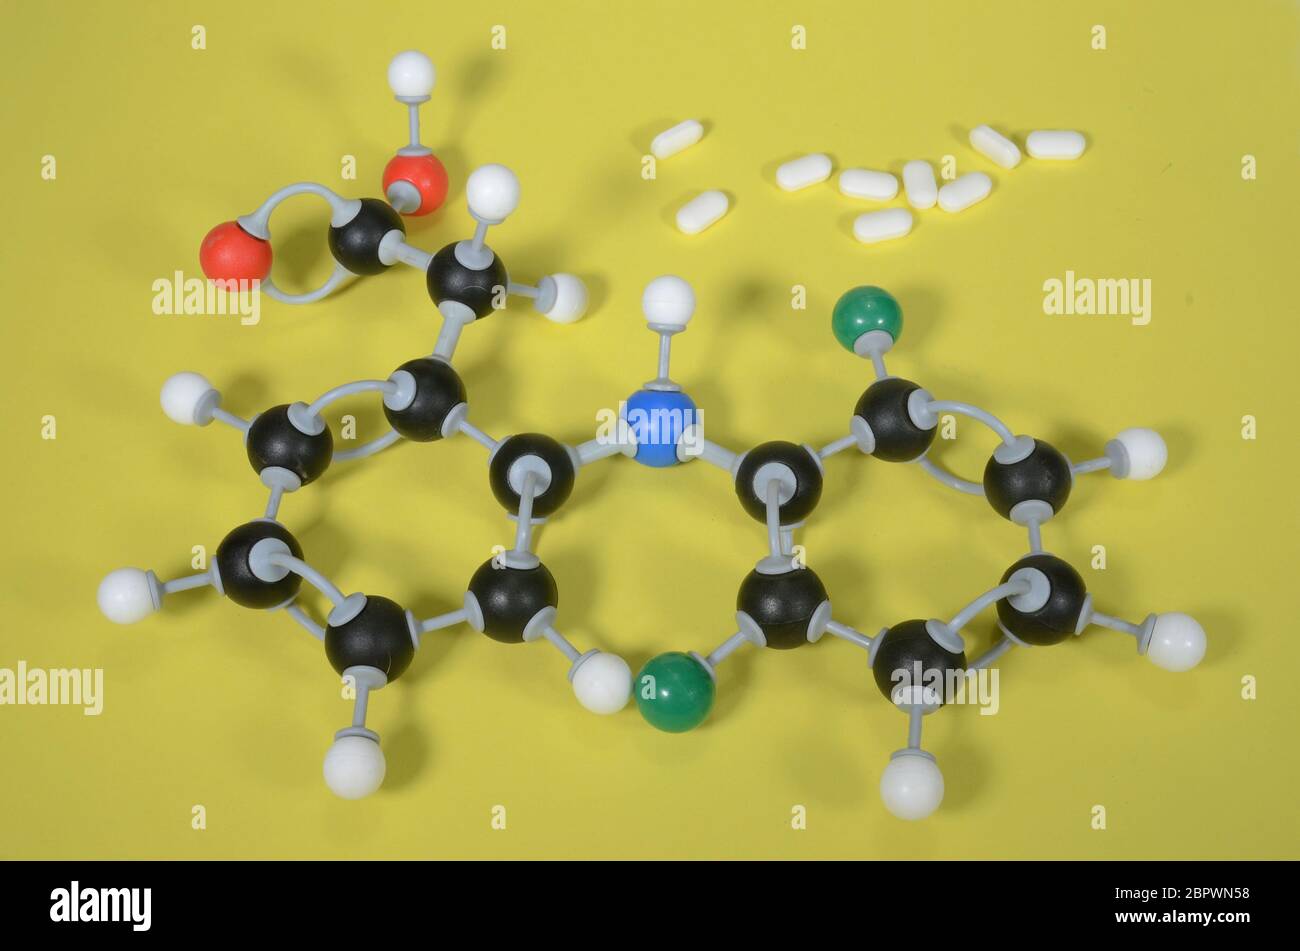 Molecule model of Diclofenac, the active ingredient in many pain killers. White is Hydrogen, black is Carbon, red is Oxygen, green is Chlorine and blu Stock Photo